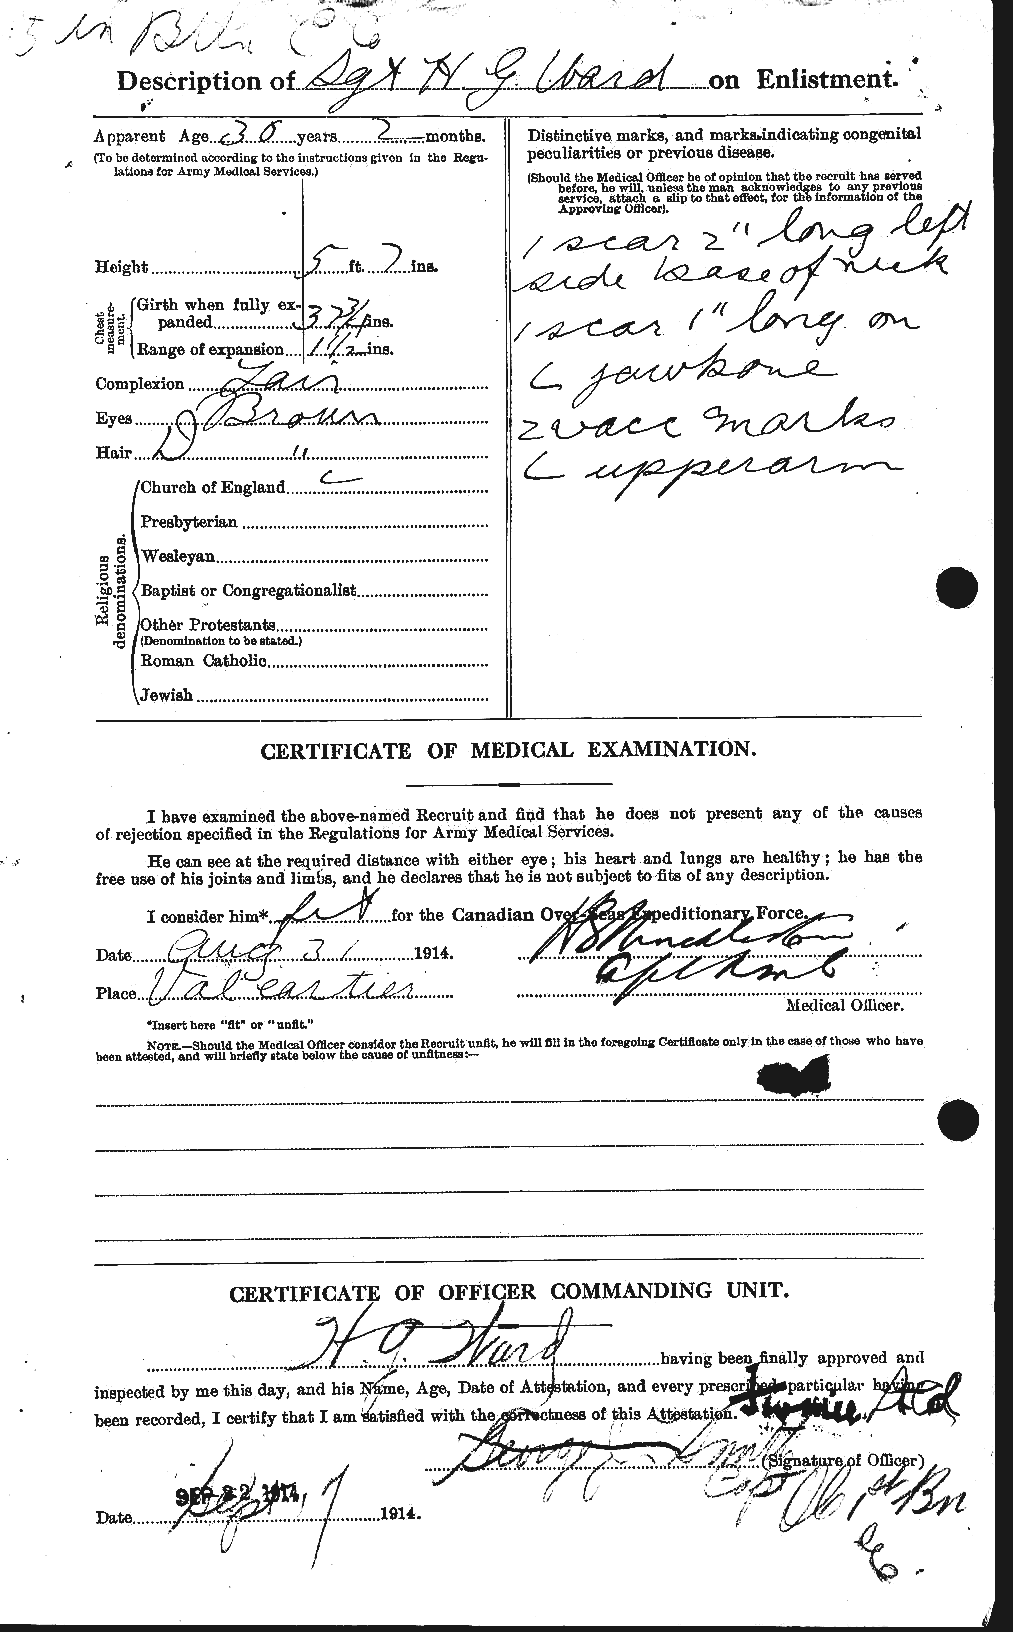 Personnel Records of the First World War - CEF 657837b